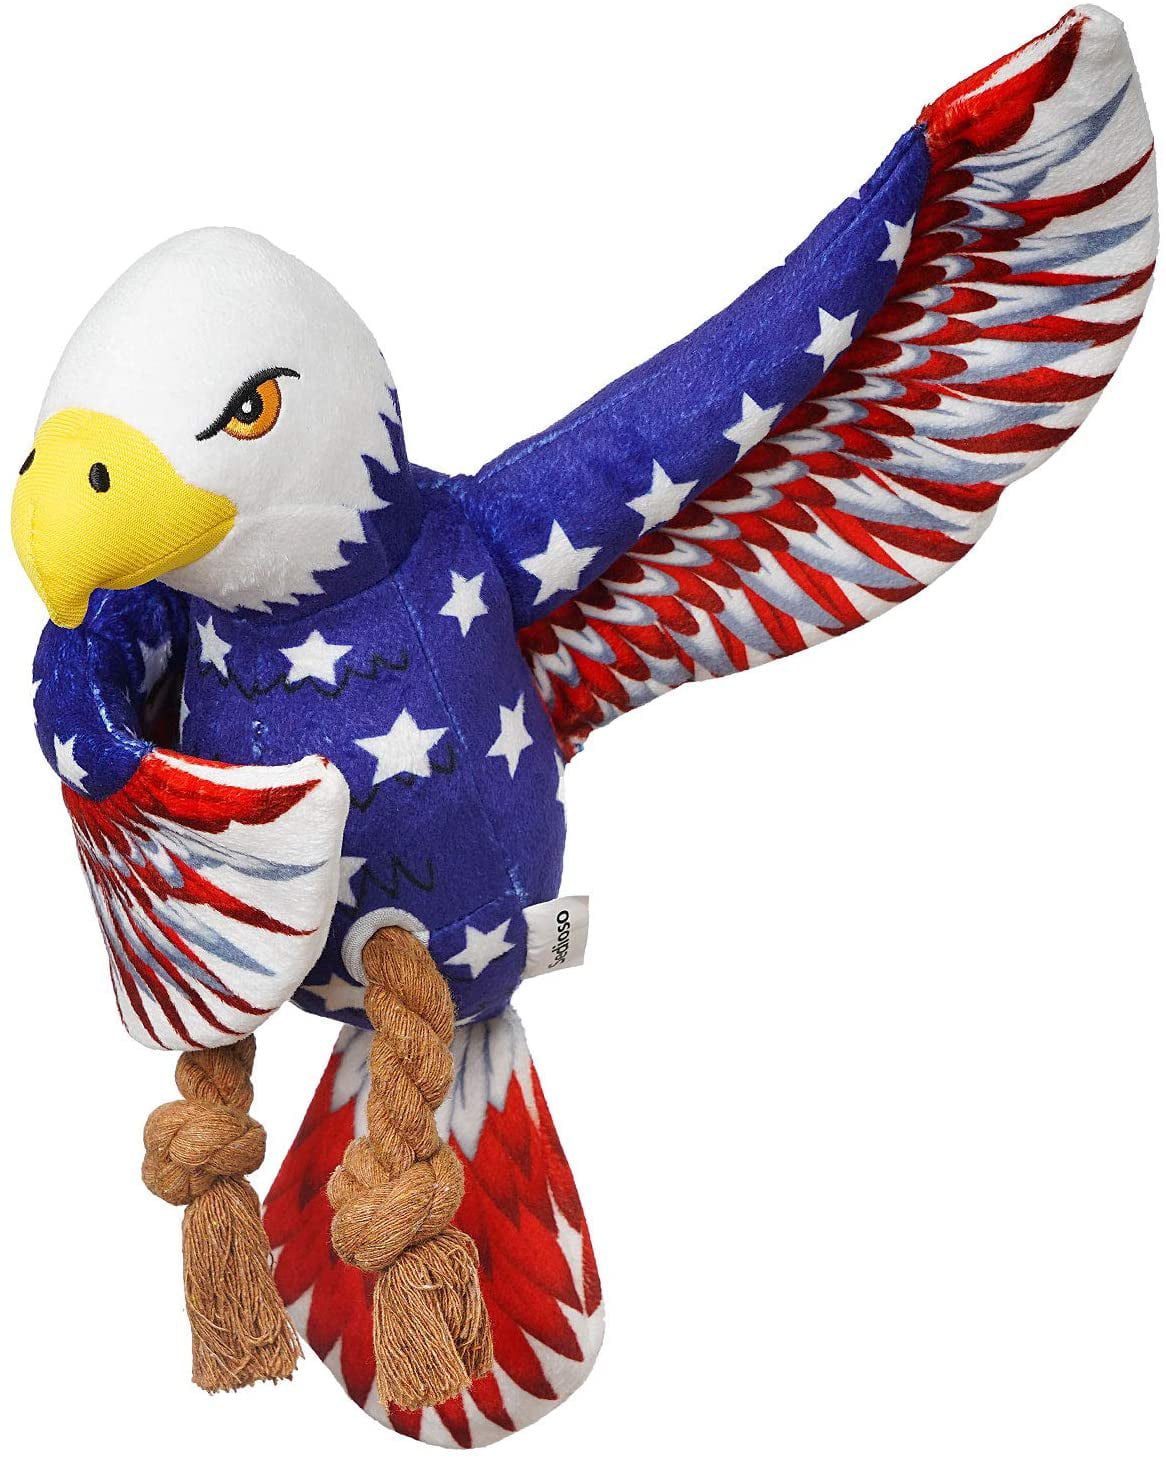 BIG Plush Bald Eagle Squeaking And Grunting Dog Toy 12" x 18" 